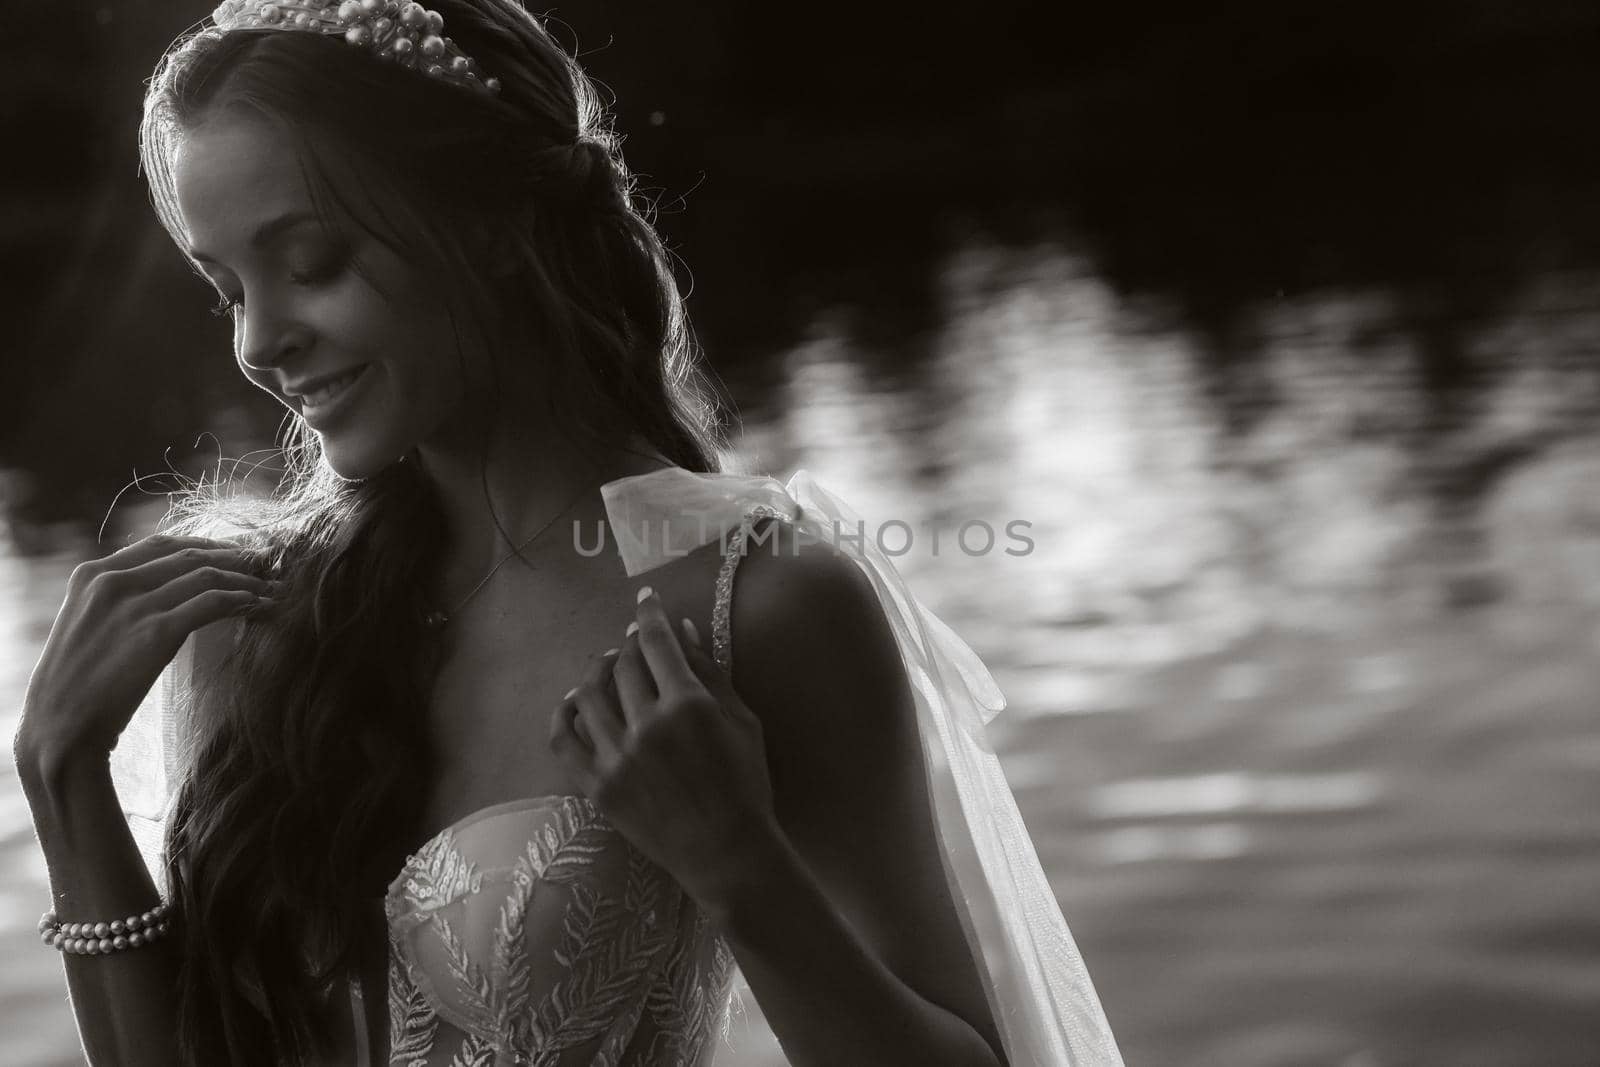 An elegant bride in a white dress enjoys nature at sunset.Model in a wedding dress in nature in the Park.Belarus.black and white photo.